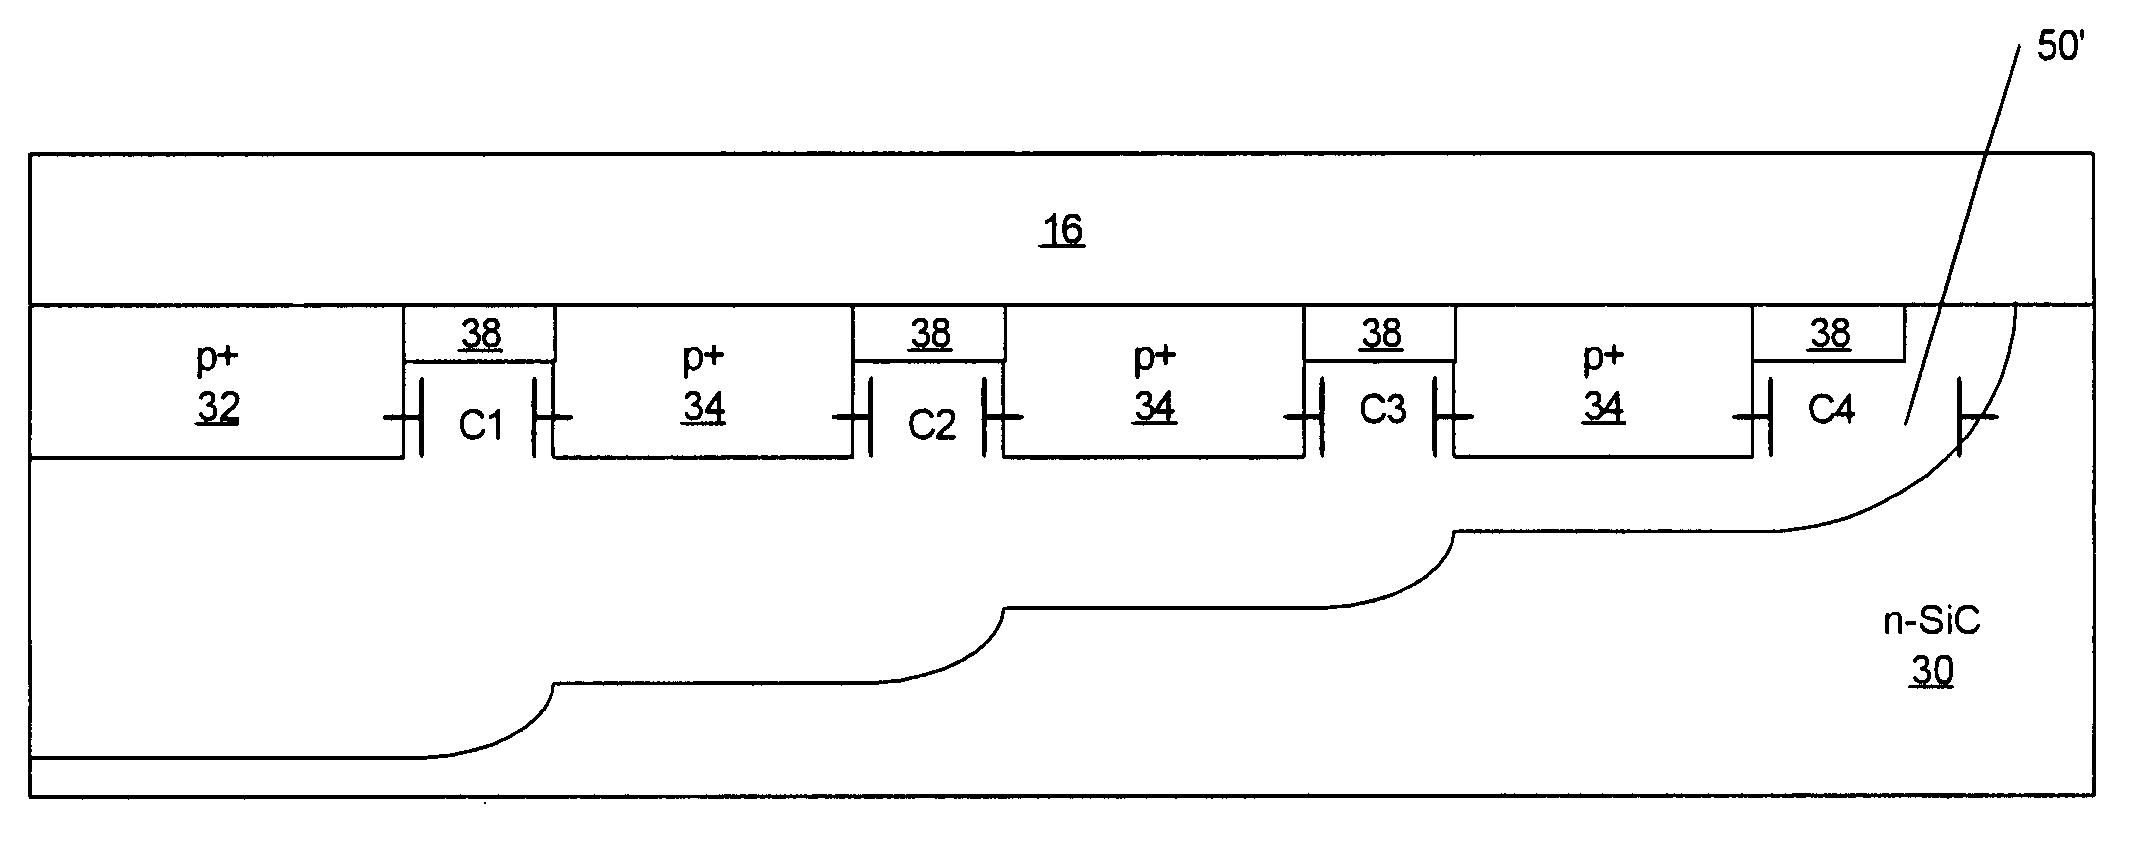 Multiple floating guard ring edge termination for silicon carbide devices